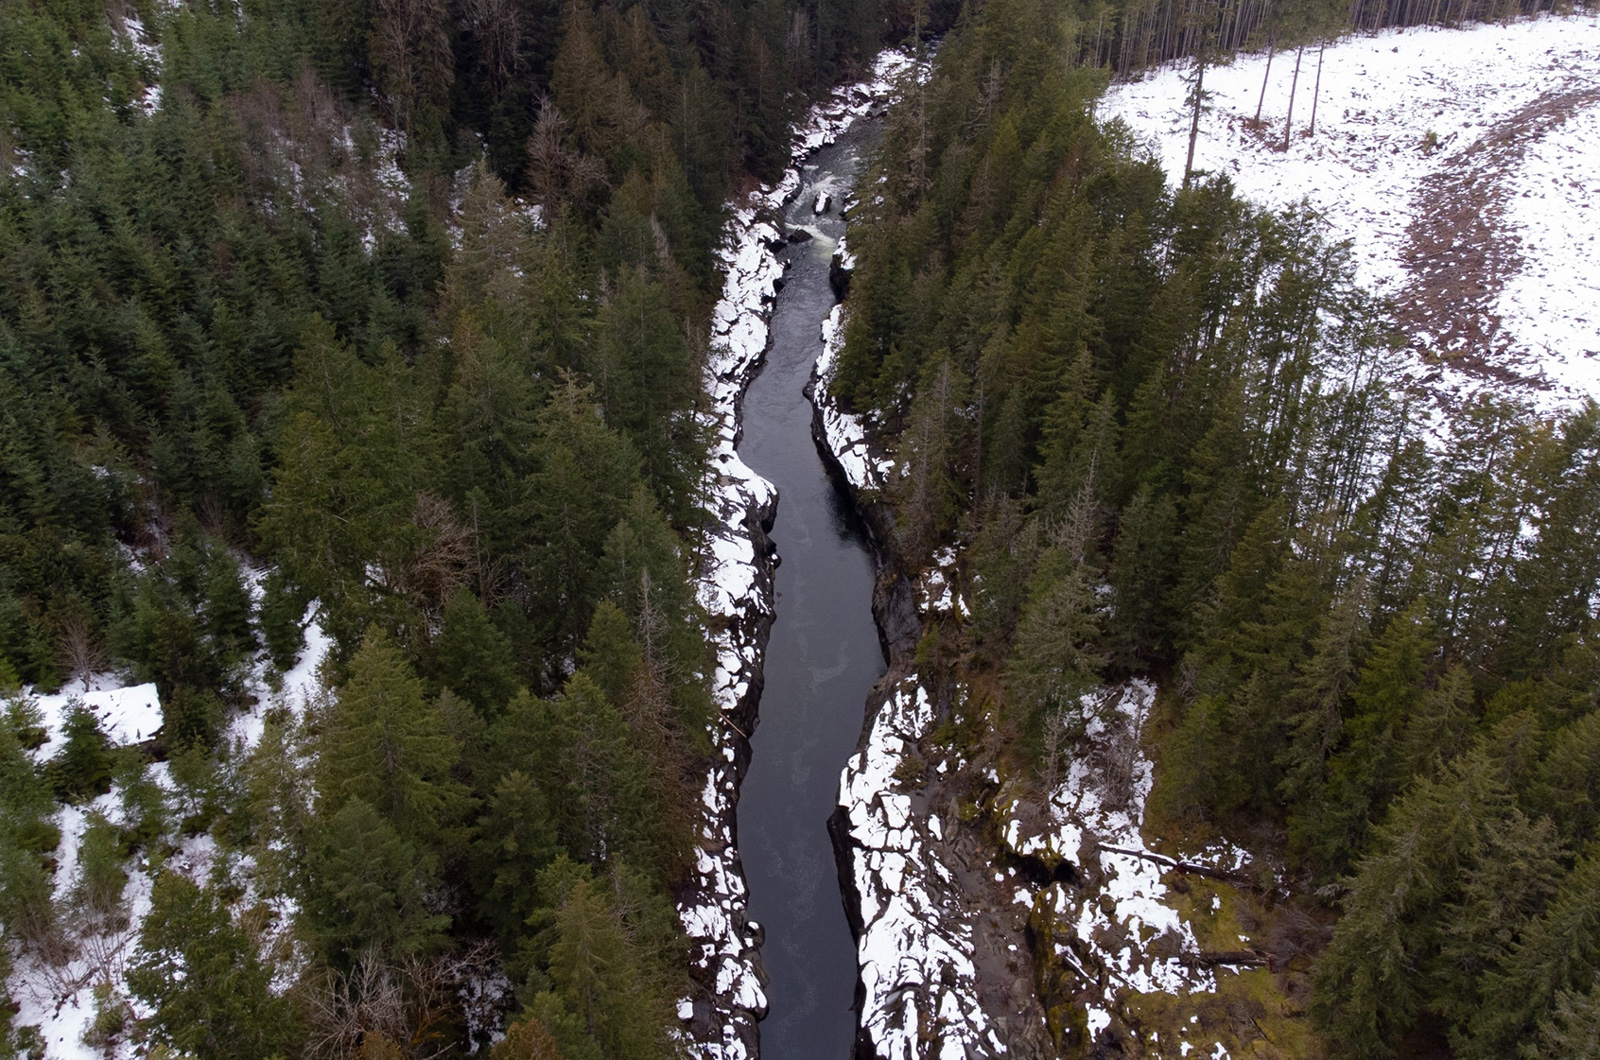 Overhead view of the river, with evergreen trees on the banks and light snow covering the ground.